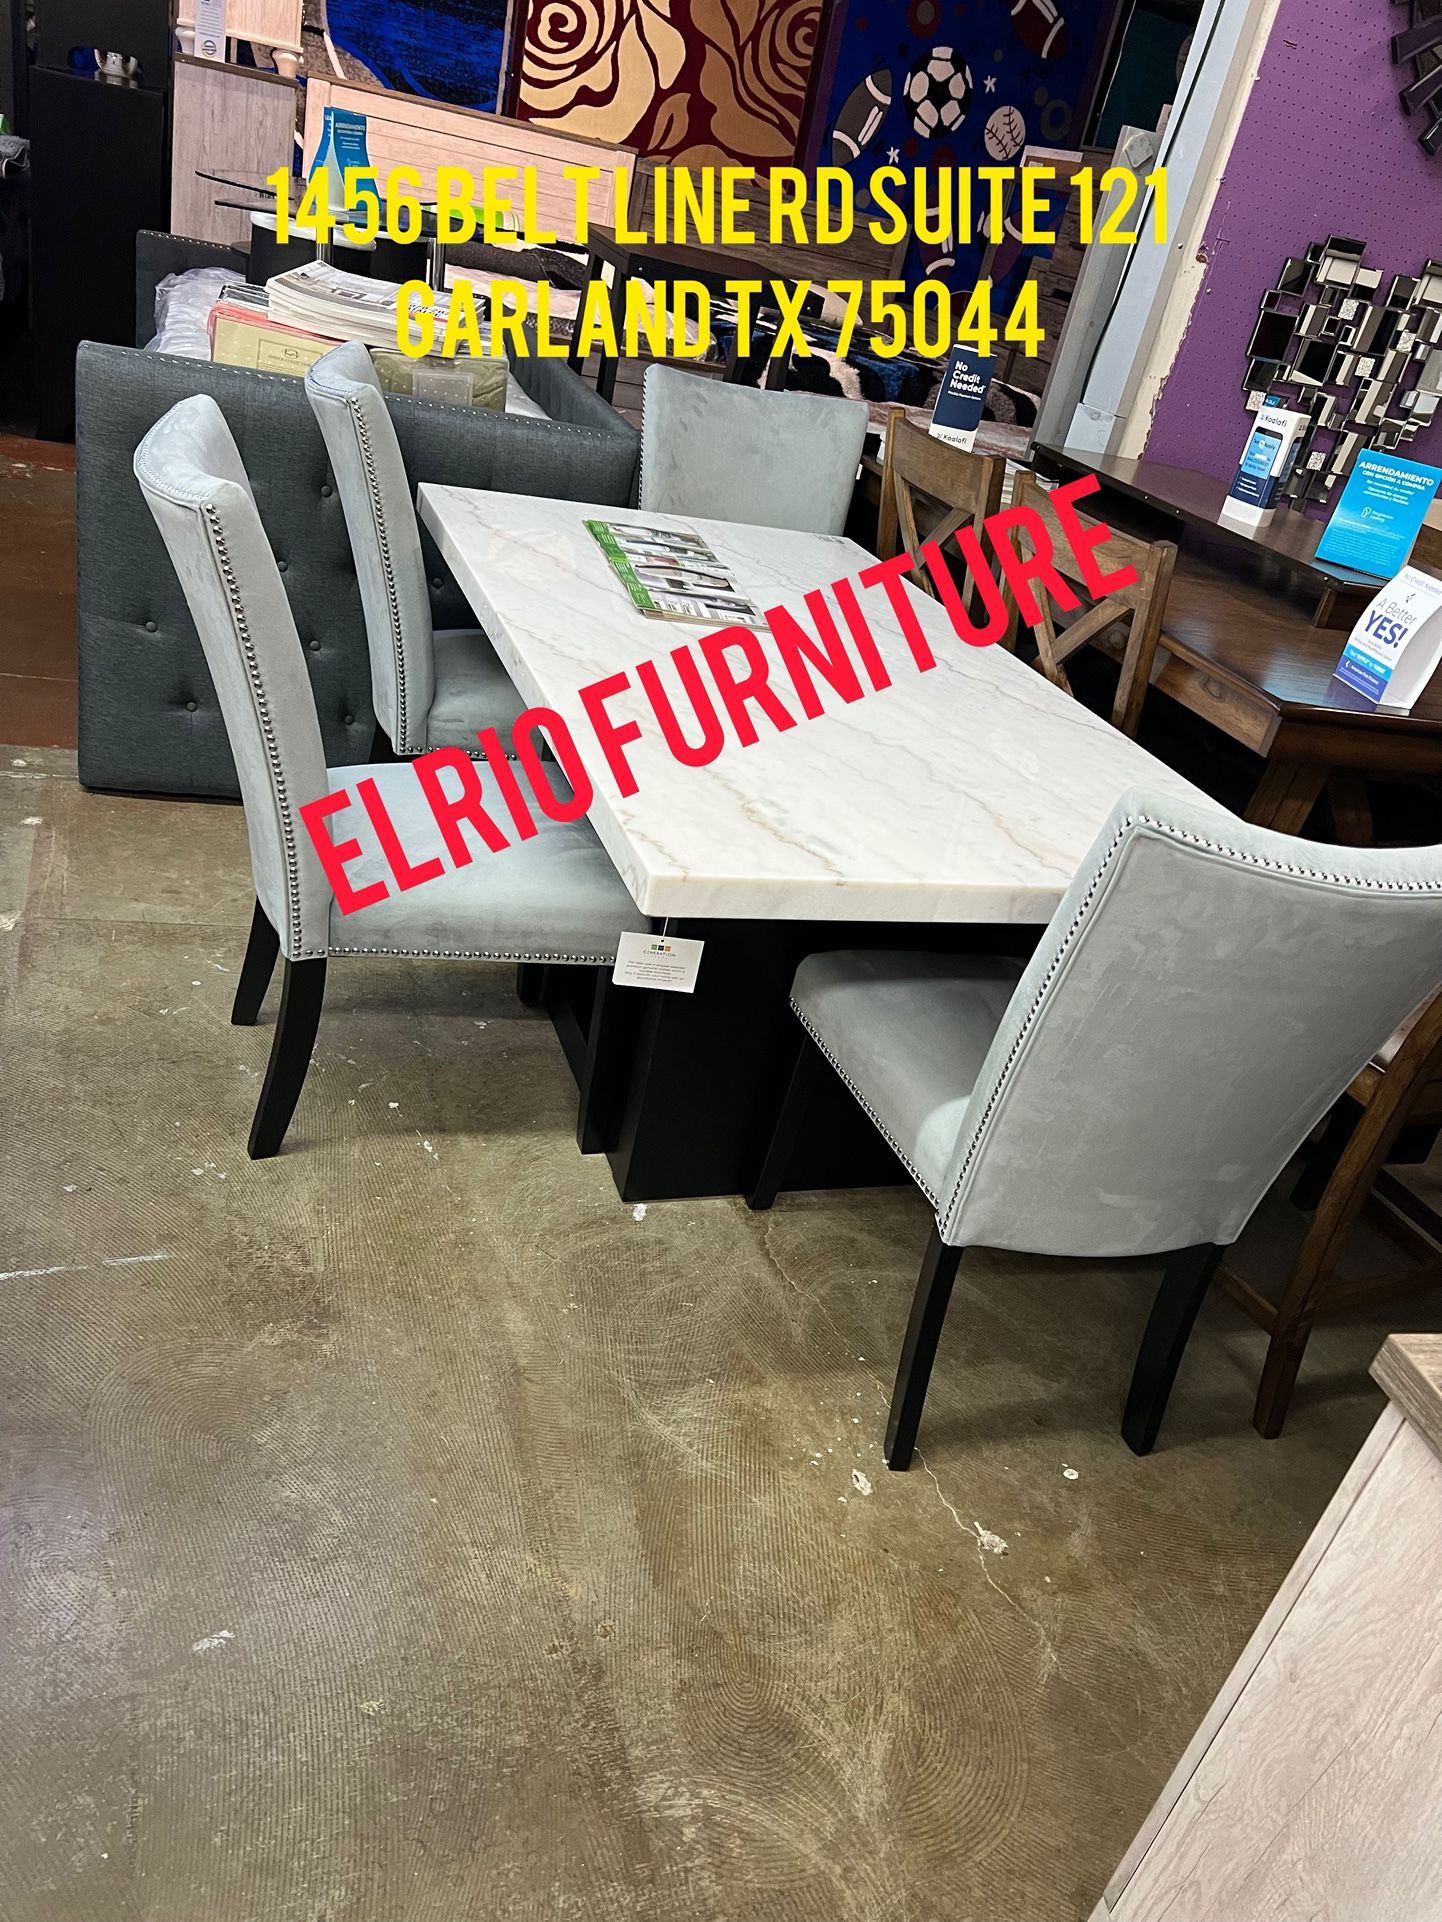 Furniture, Dining Table